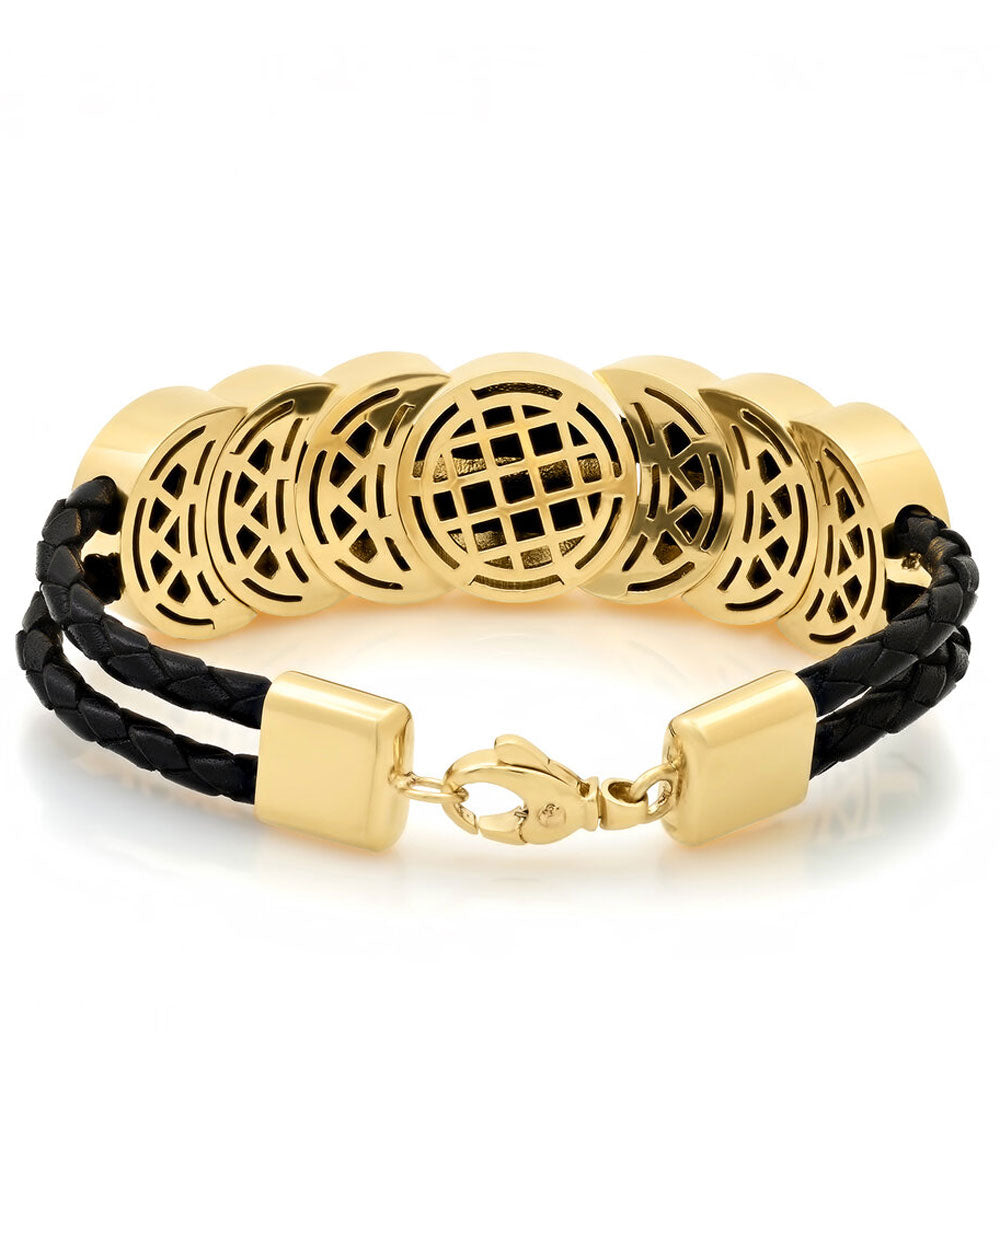 Western Gold and Leather Bracelet